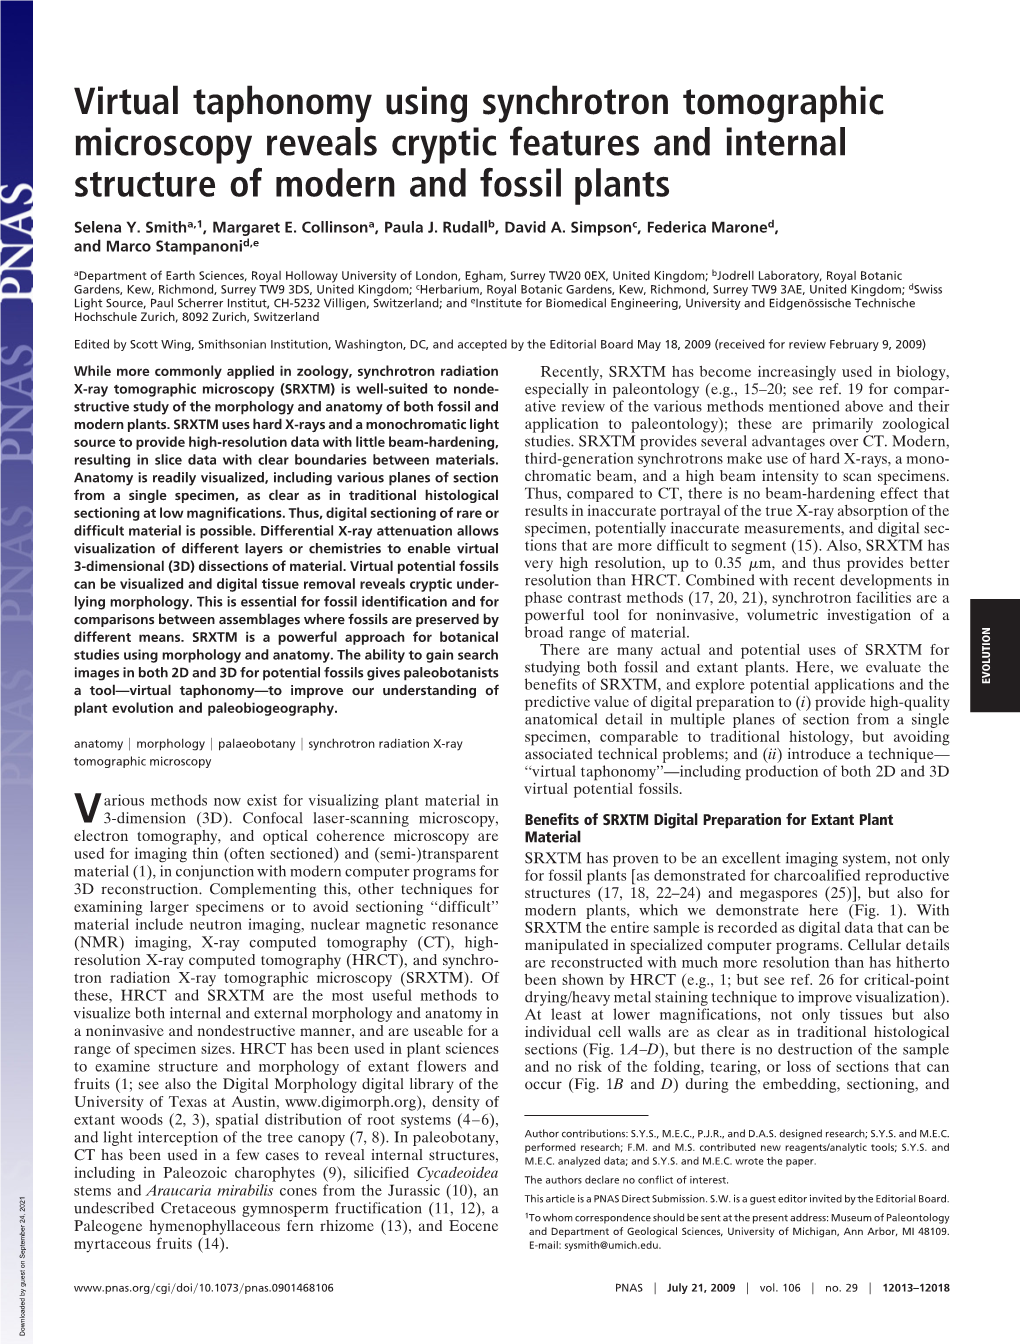 Virtual Taphonomy Using Synchrotron Tomographic Microscopy Reveals Cryptic Features and Internal Structure of Modern and Fossil Plants